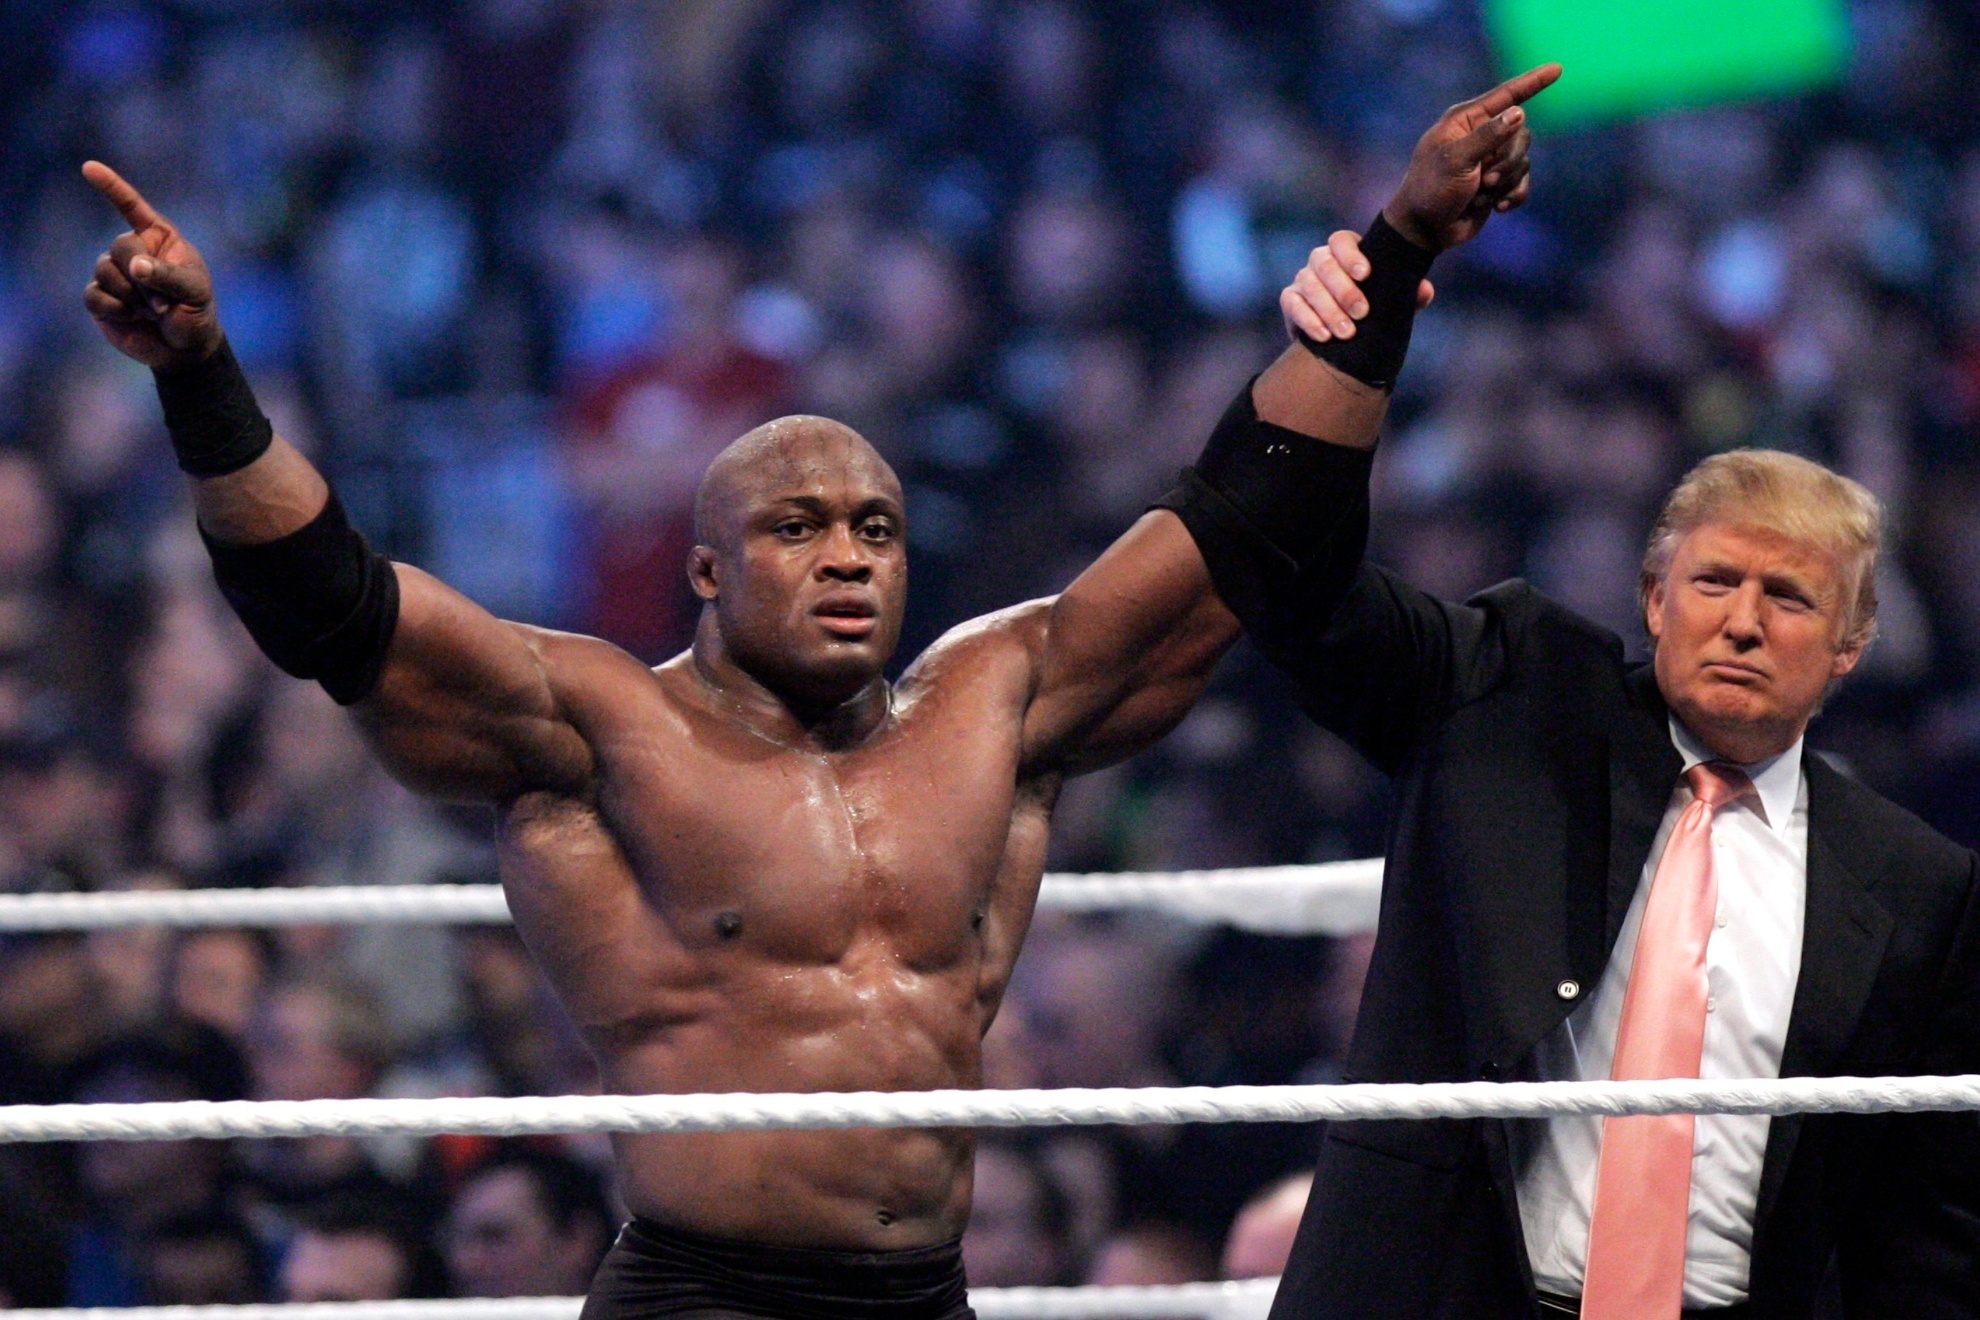 Donald Trump raises the arm of wrestler Bobby Lashley at Ford Field in Detroit, 2007.